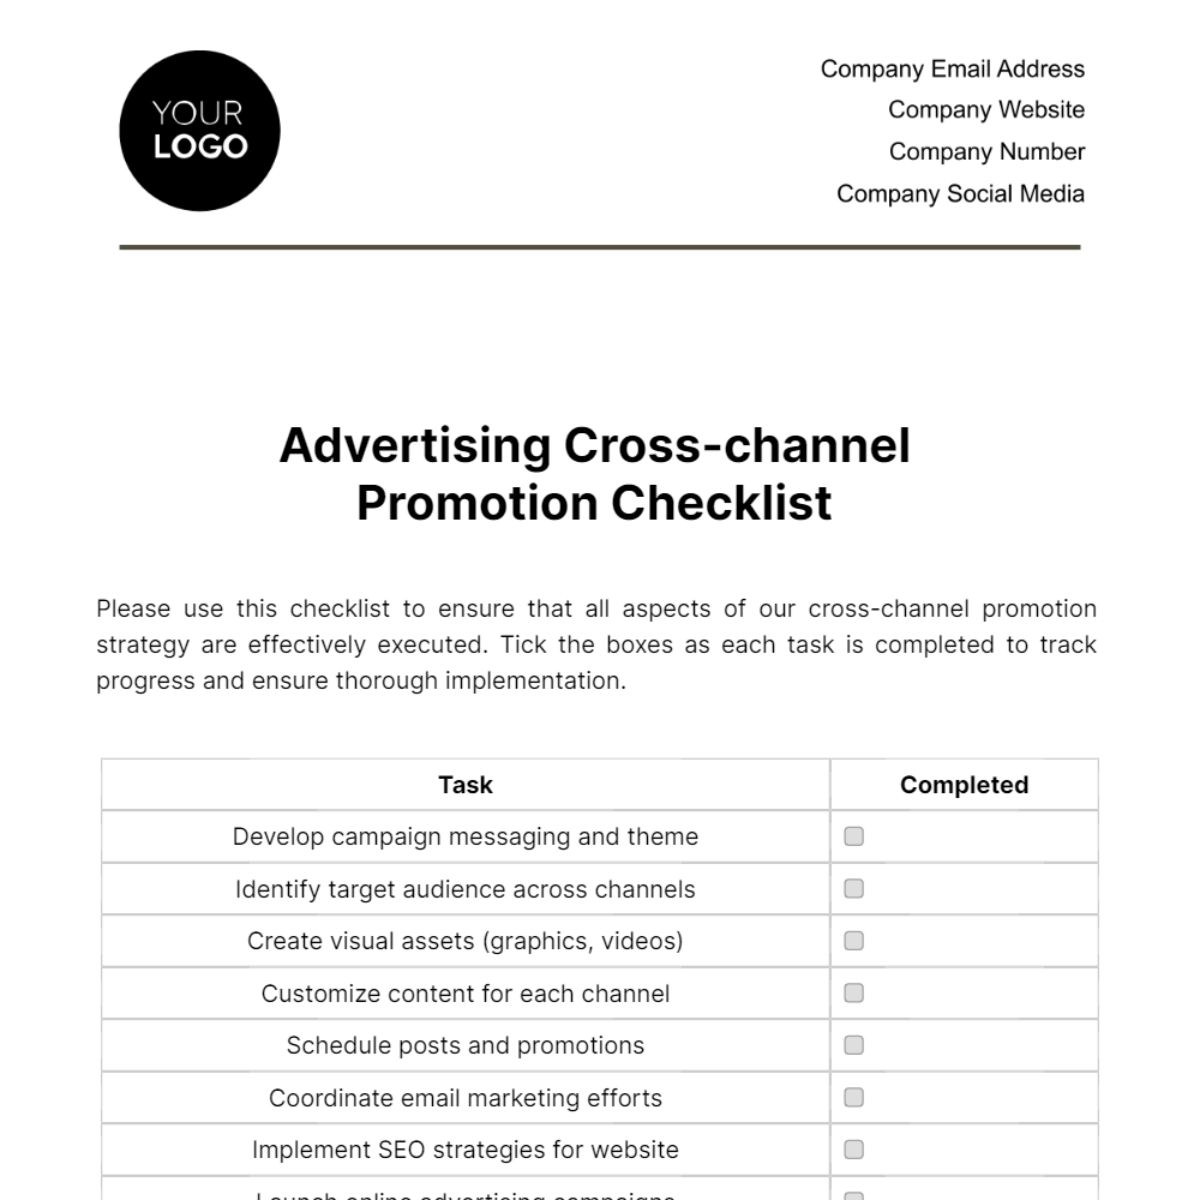 Advertising Cross-channel Promotion Checklist Template